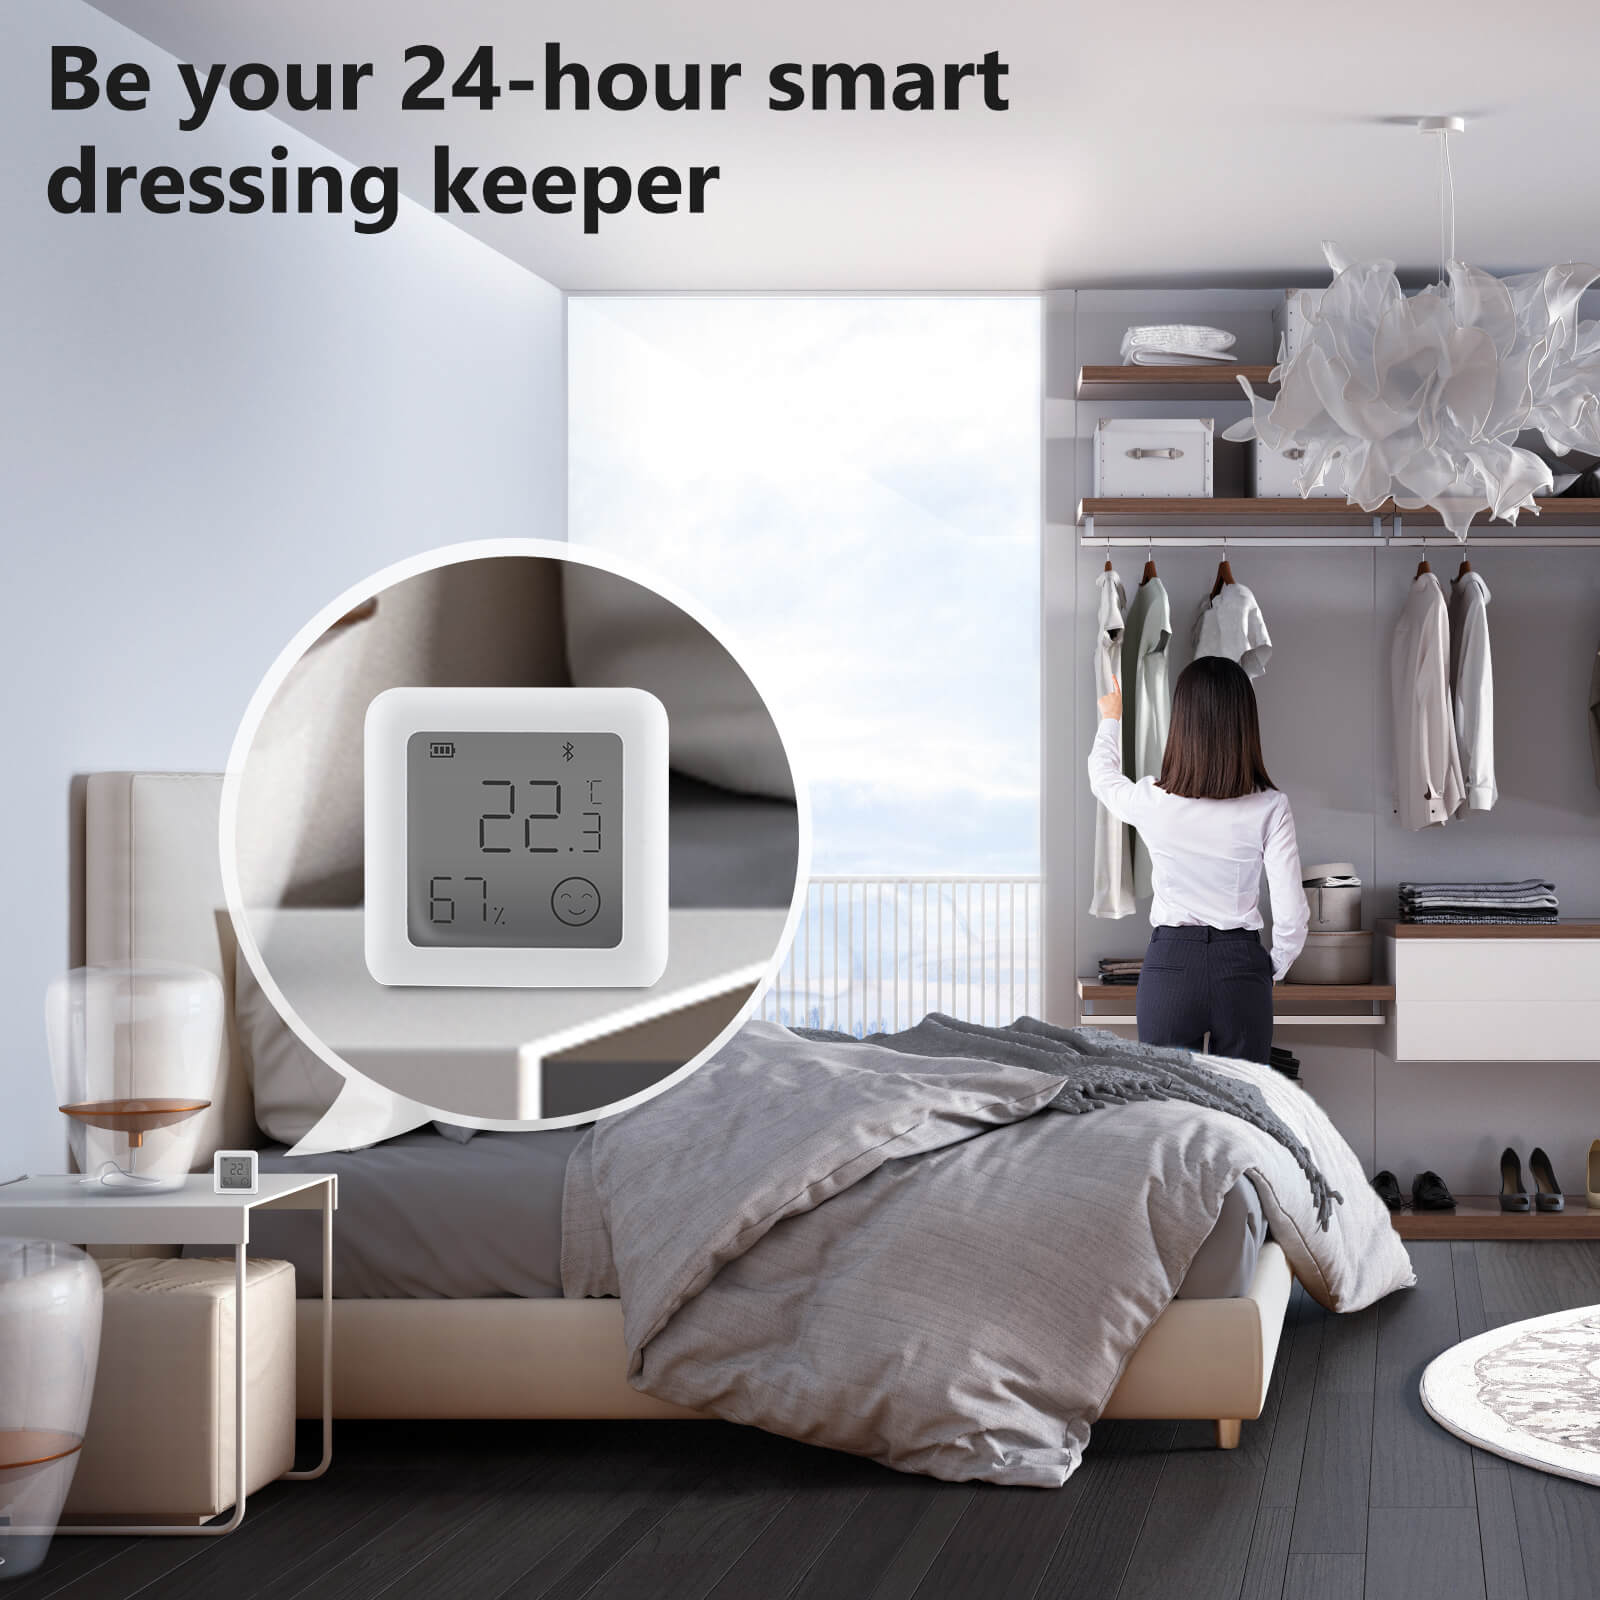 Be your 24-hour smart dressing keeper